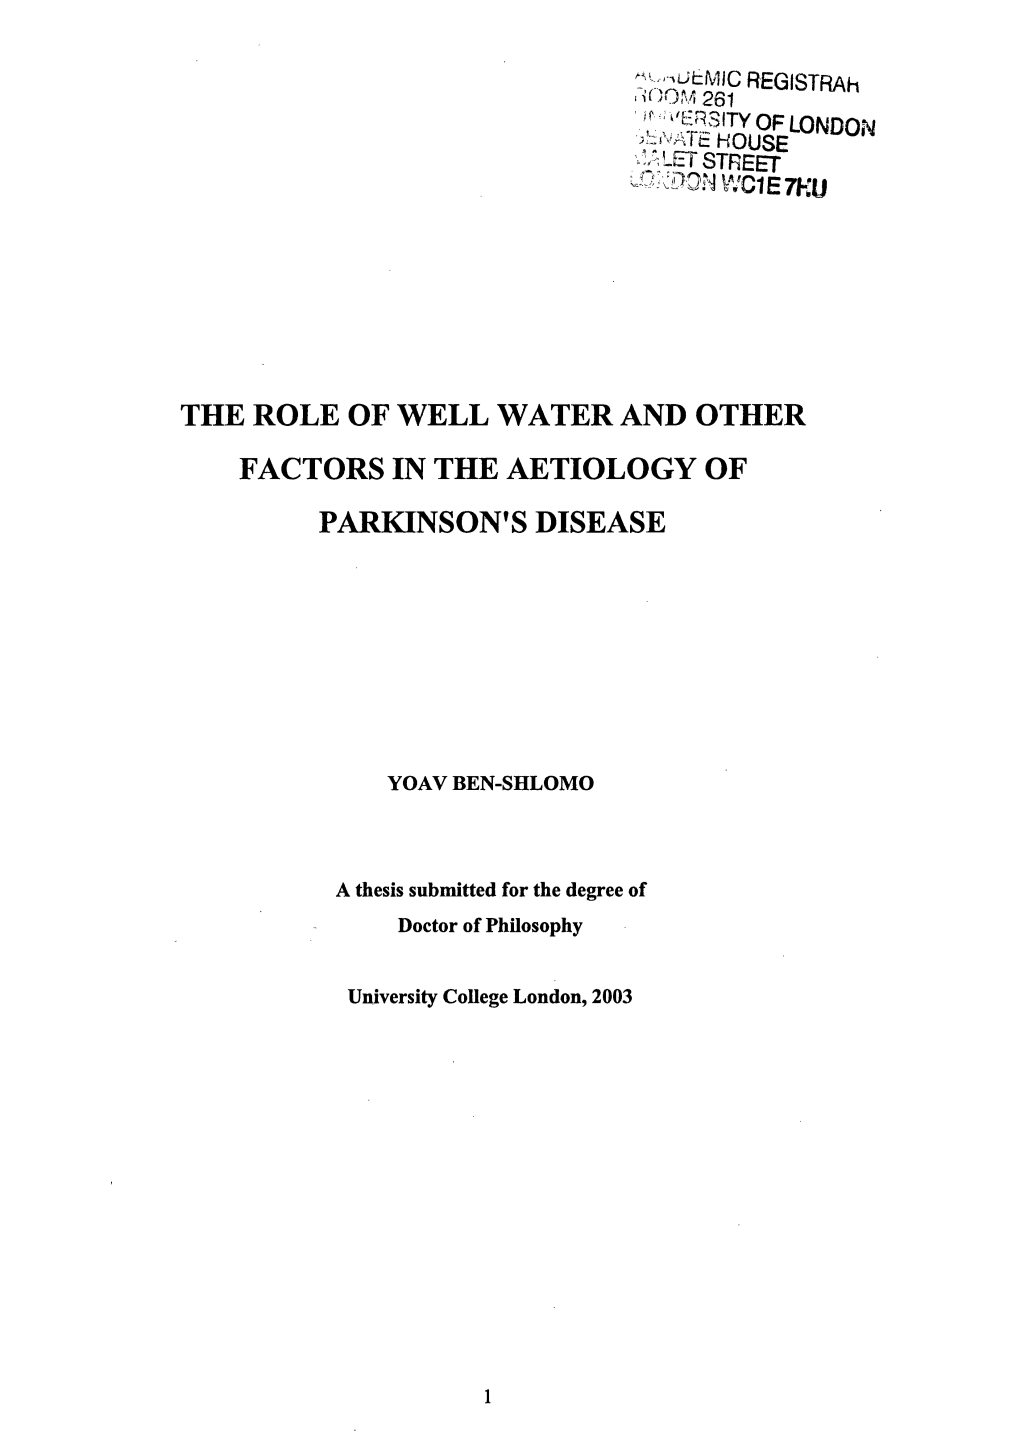 The Role of Well Water and Other Factors in the Aetiology of Parkinson’S Disease